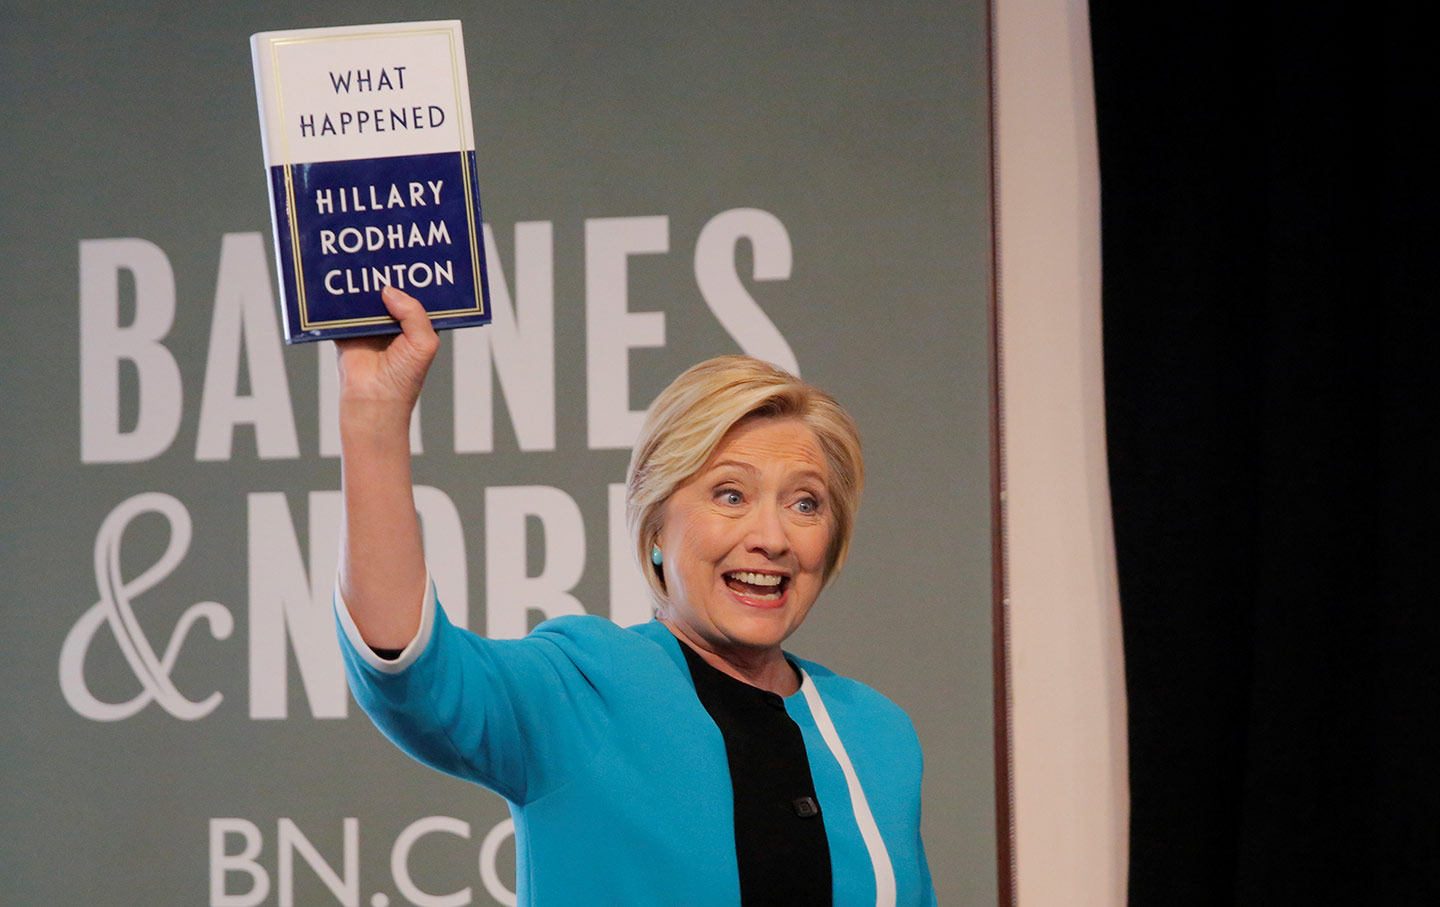 Hillary Clinton Book Signing